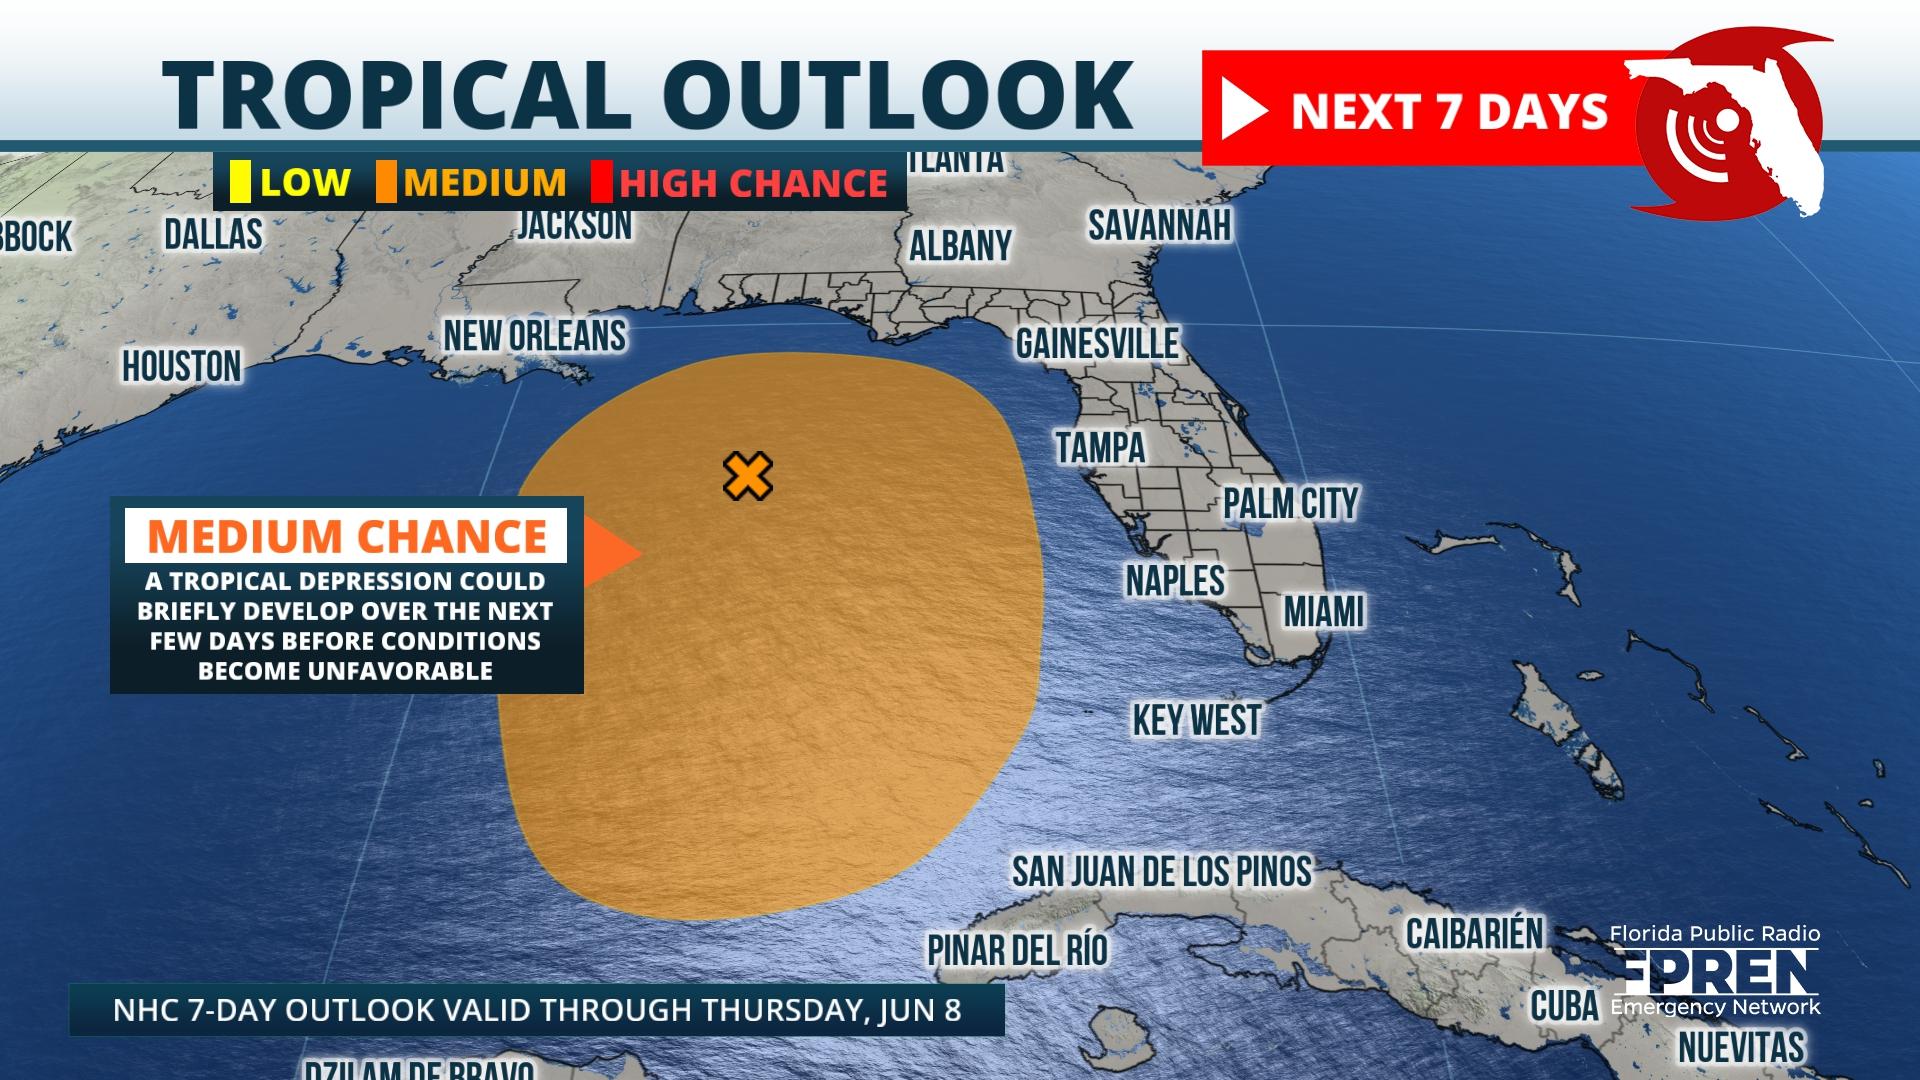 Featured image for “Tropical disturbance in Gulf has stronger chance of developing”